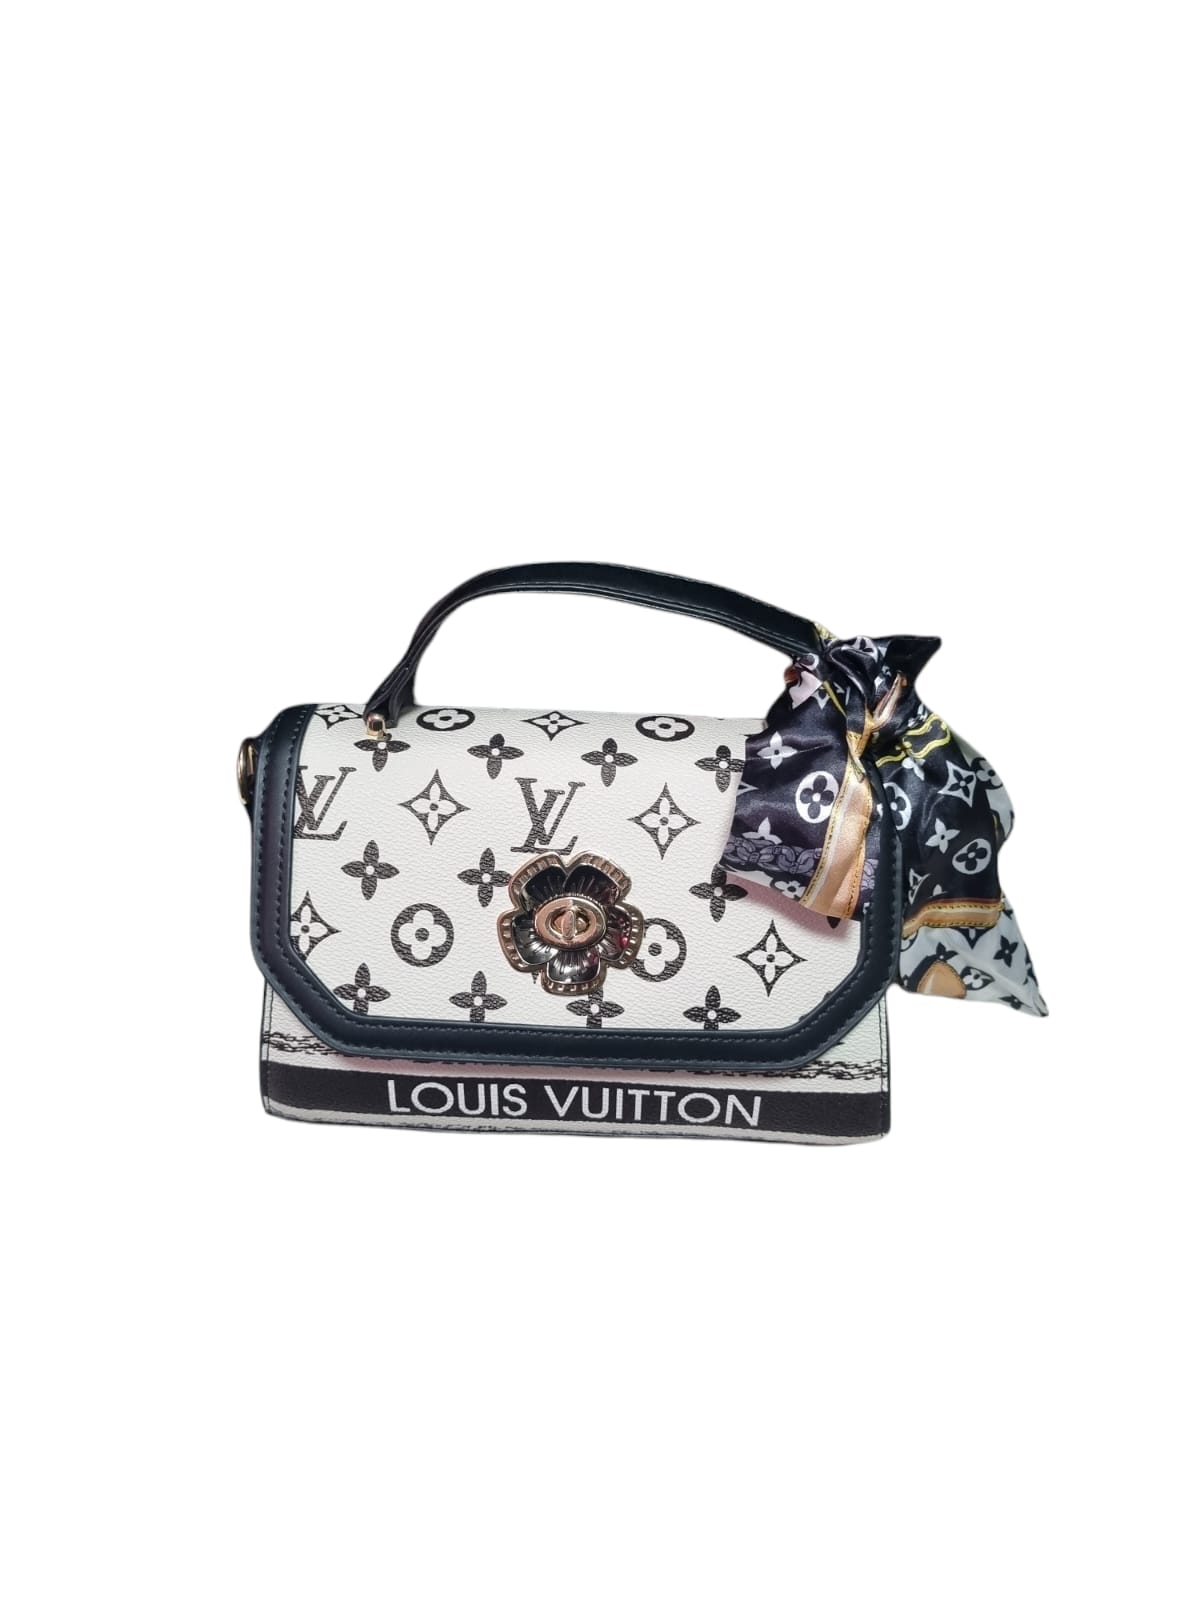 LV Bag - With Scarf Brown or White - Fragrance Deliver SA